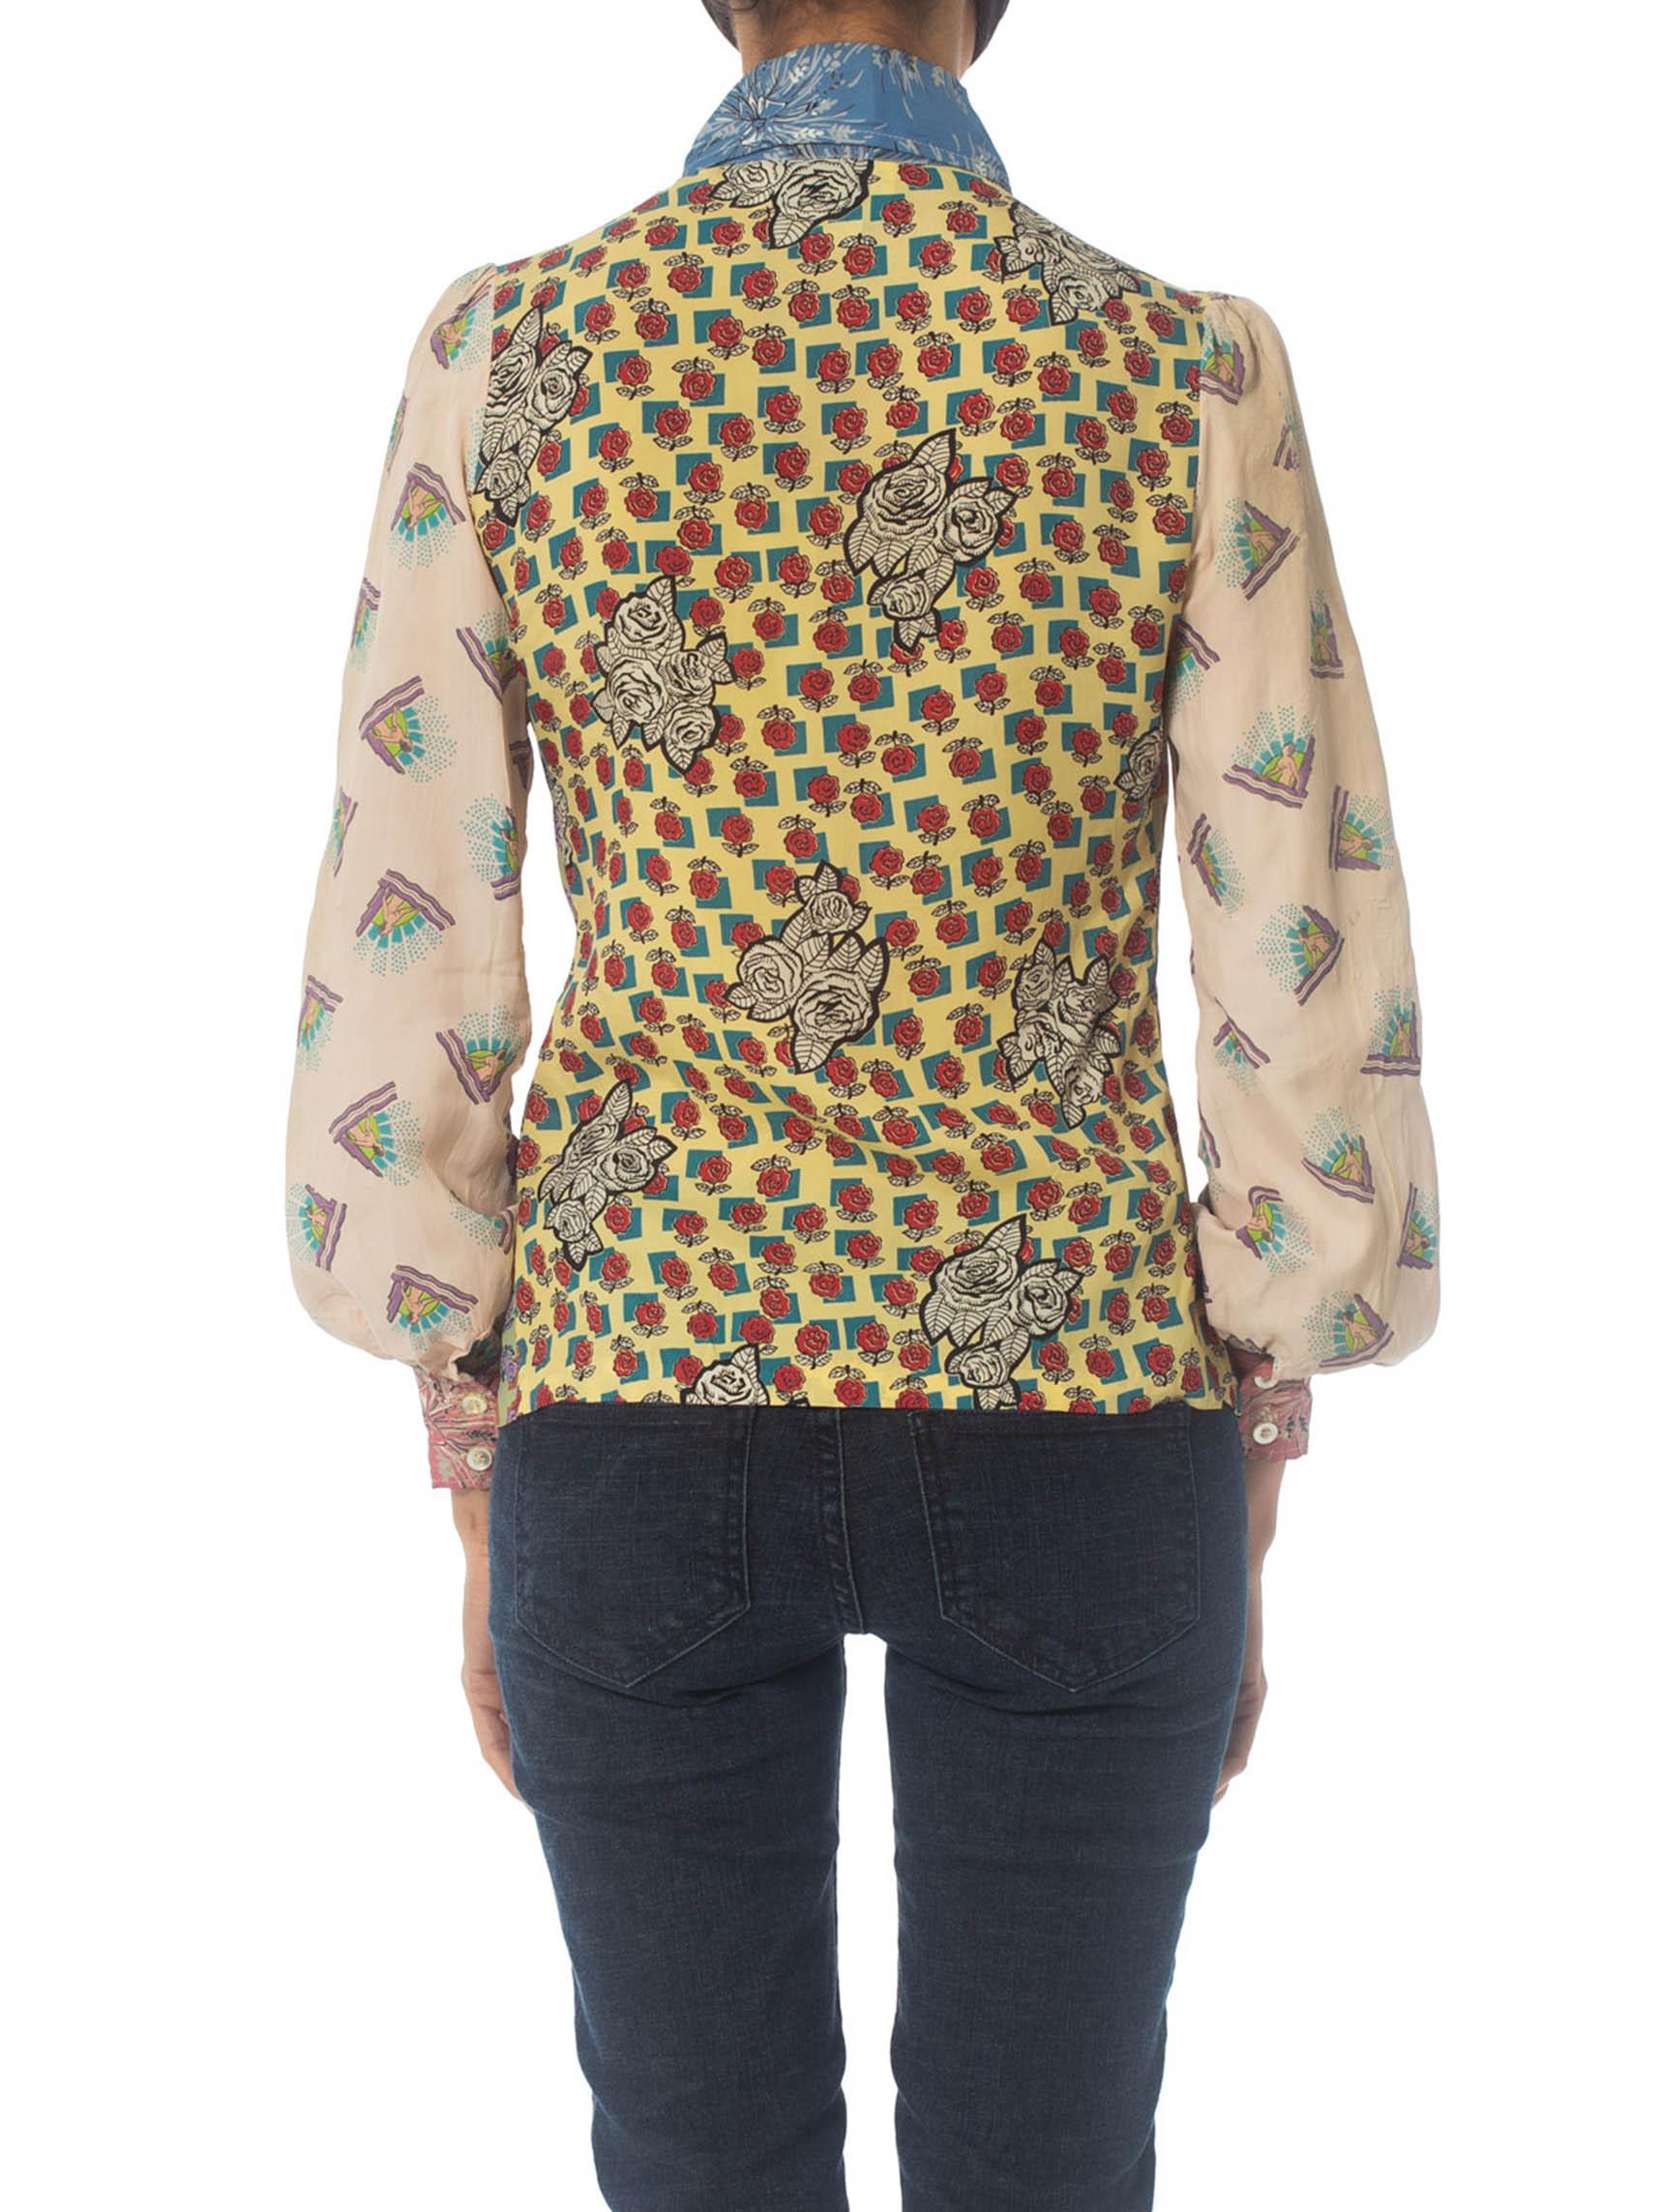 1970S Rayon Patchwork Print Shirt Made From 1940S Vintage Prints 1